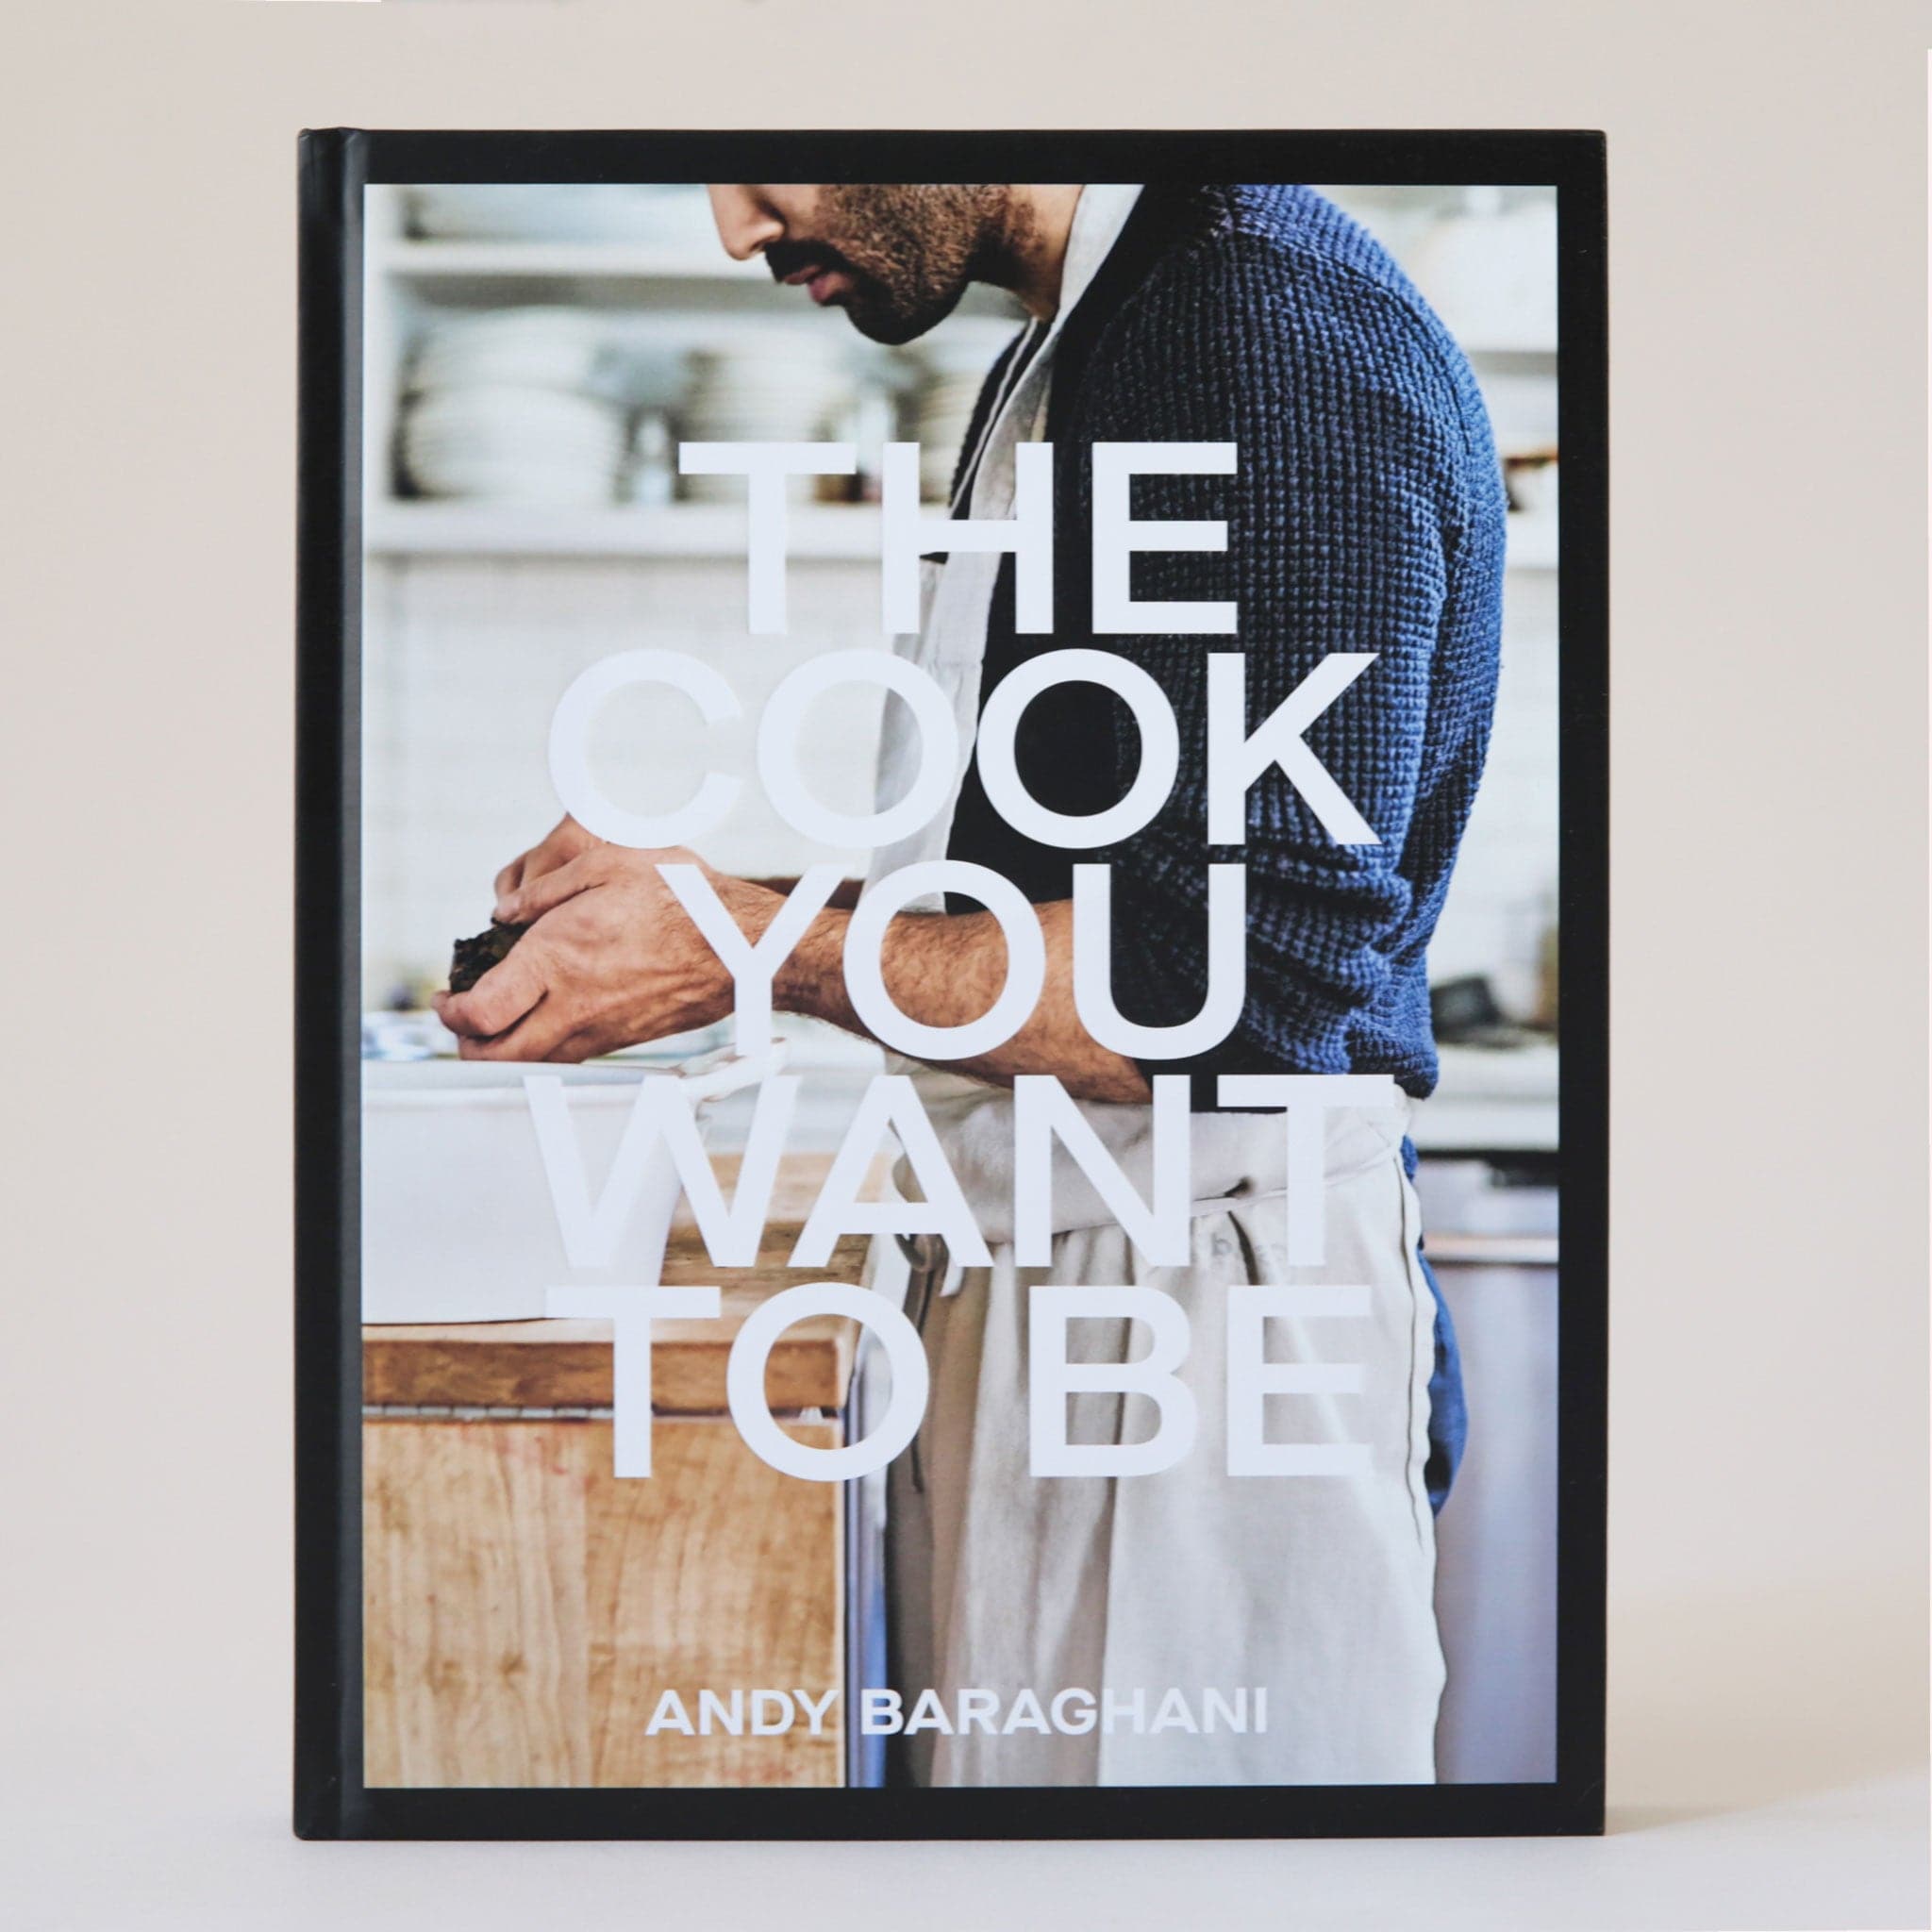 A sleek and stunning cookbook with the title, "The Cook You Want To Be" in white, bold text in front of a photo of a chef with an apron on, cooking.